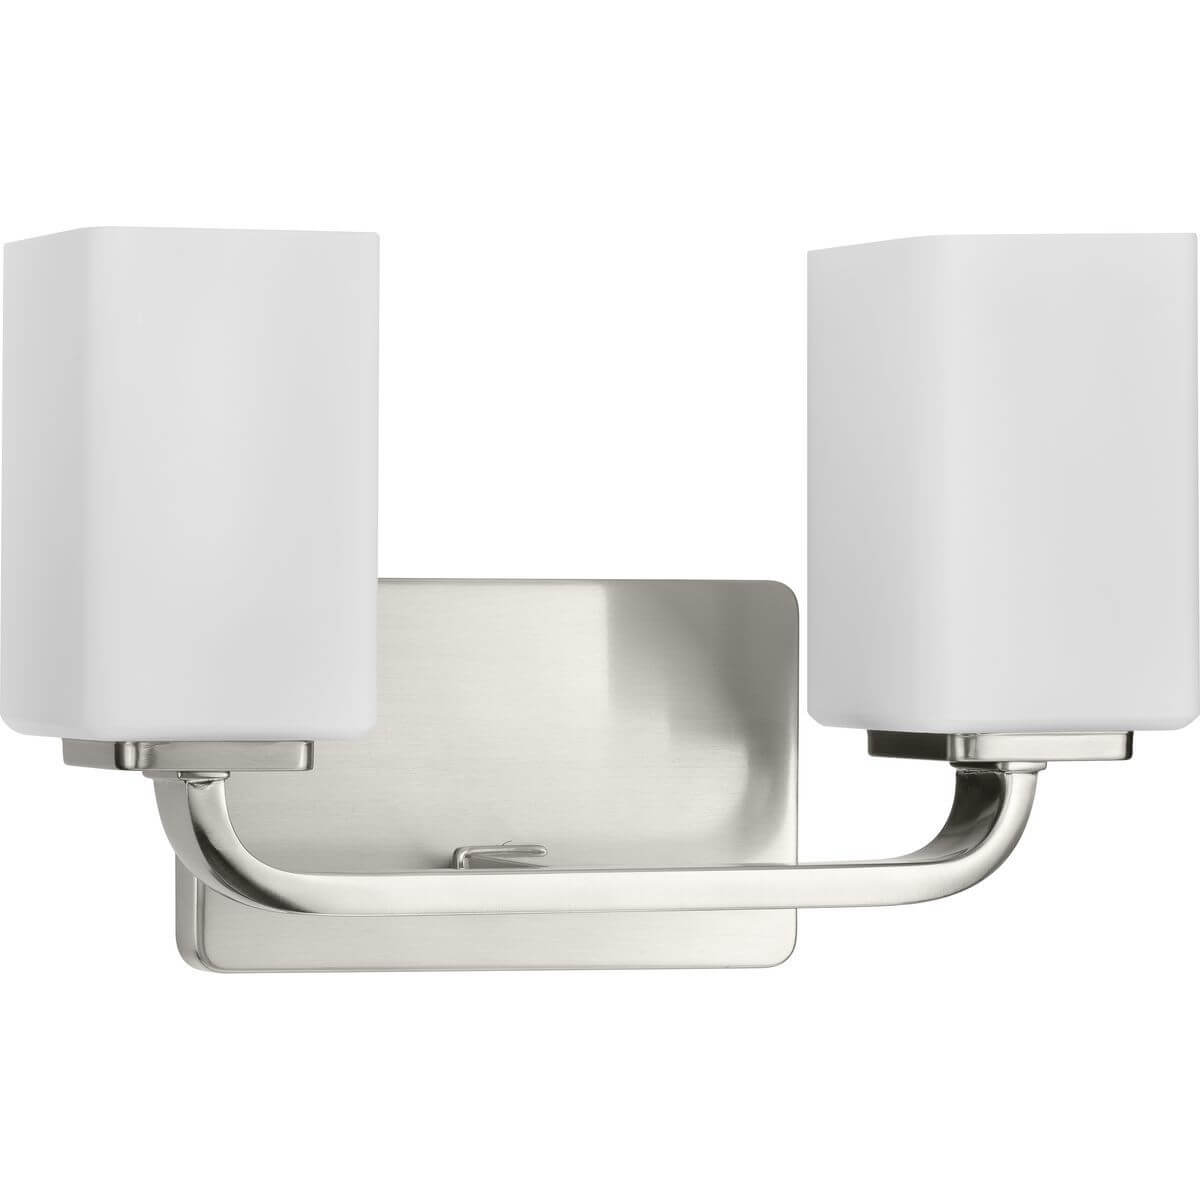 Progress Lighting Cowan 2 Light 14 inch Bath Vanity Light in Brushed Nickel with Etched Opal Glass P300369-009